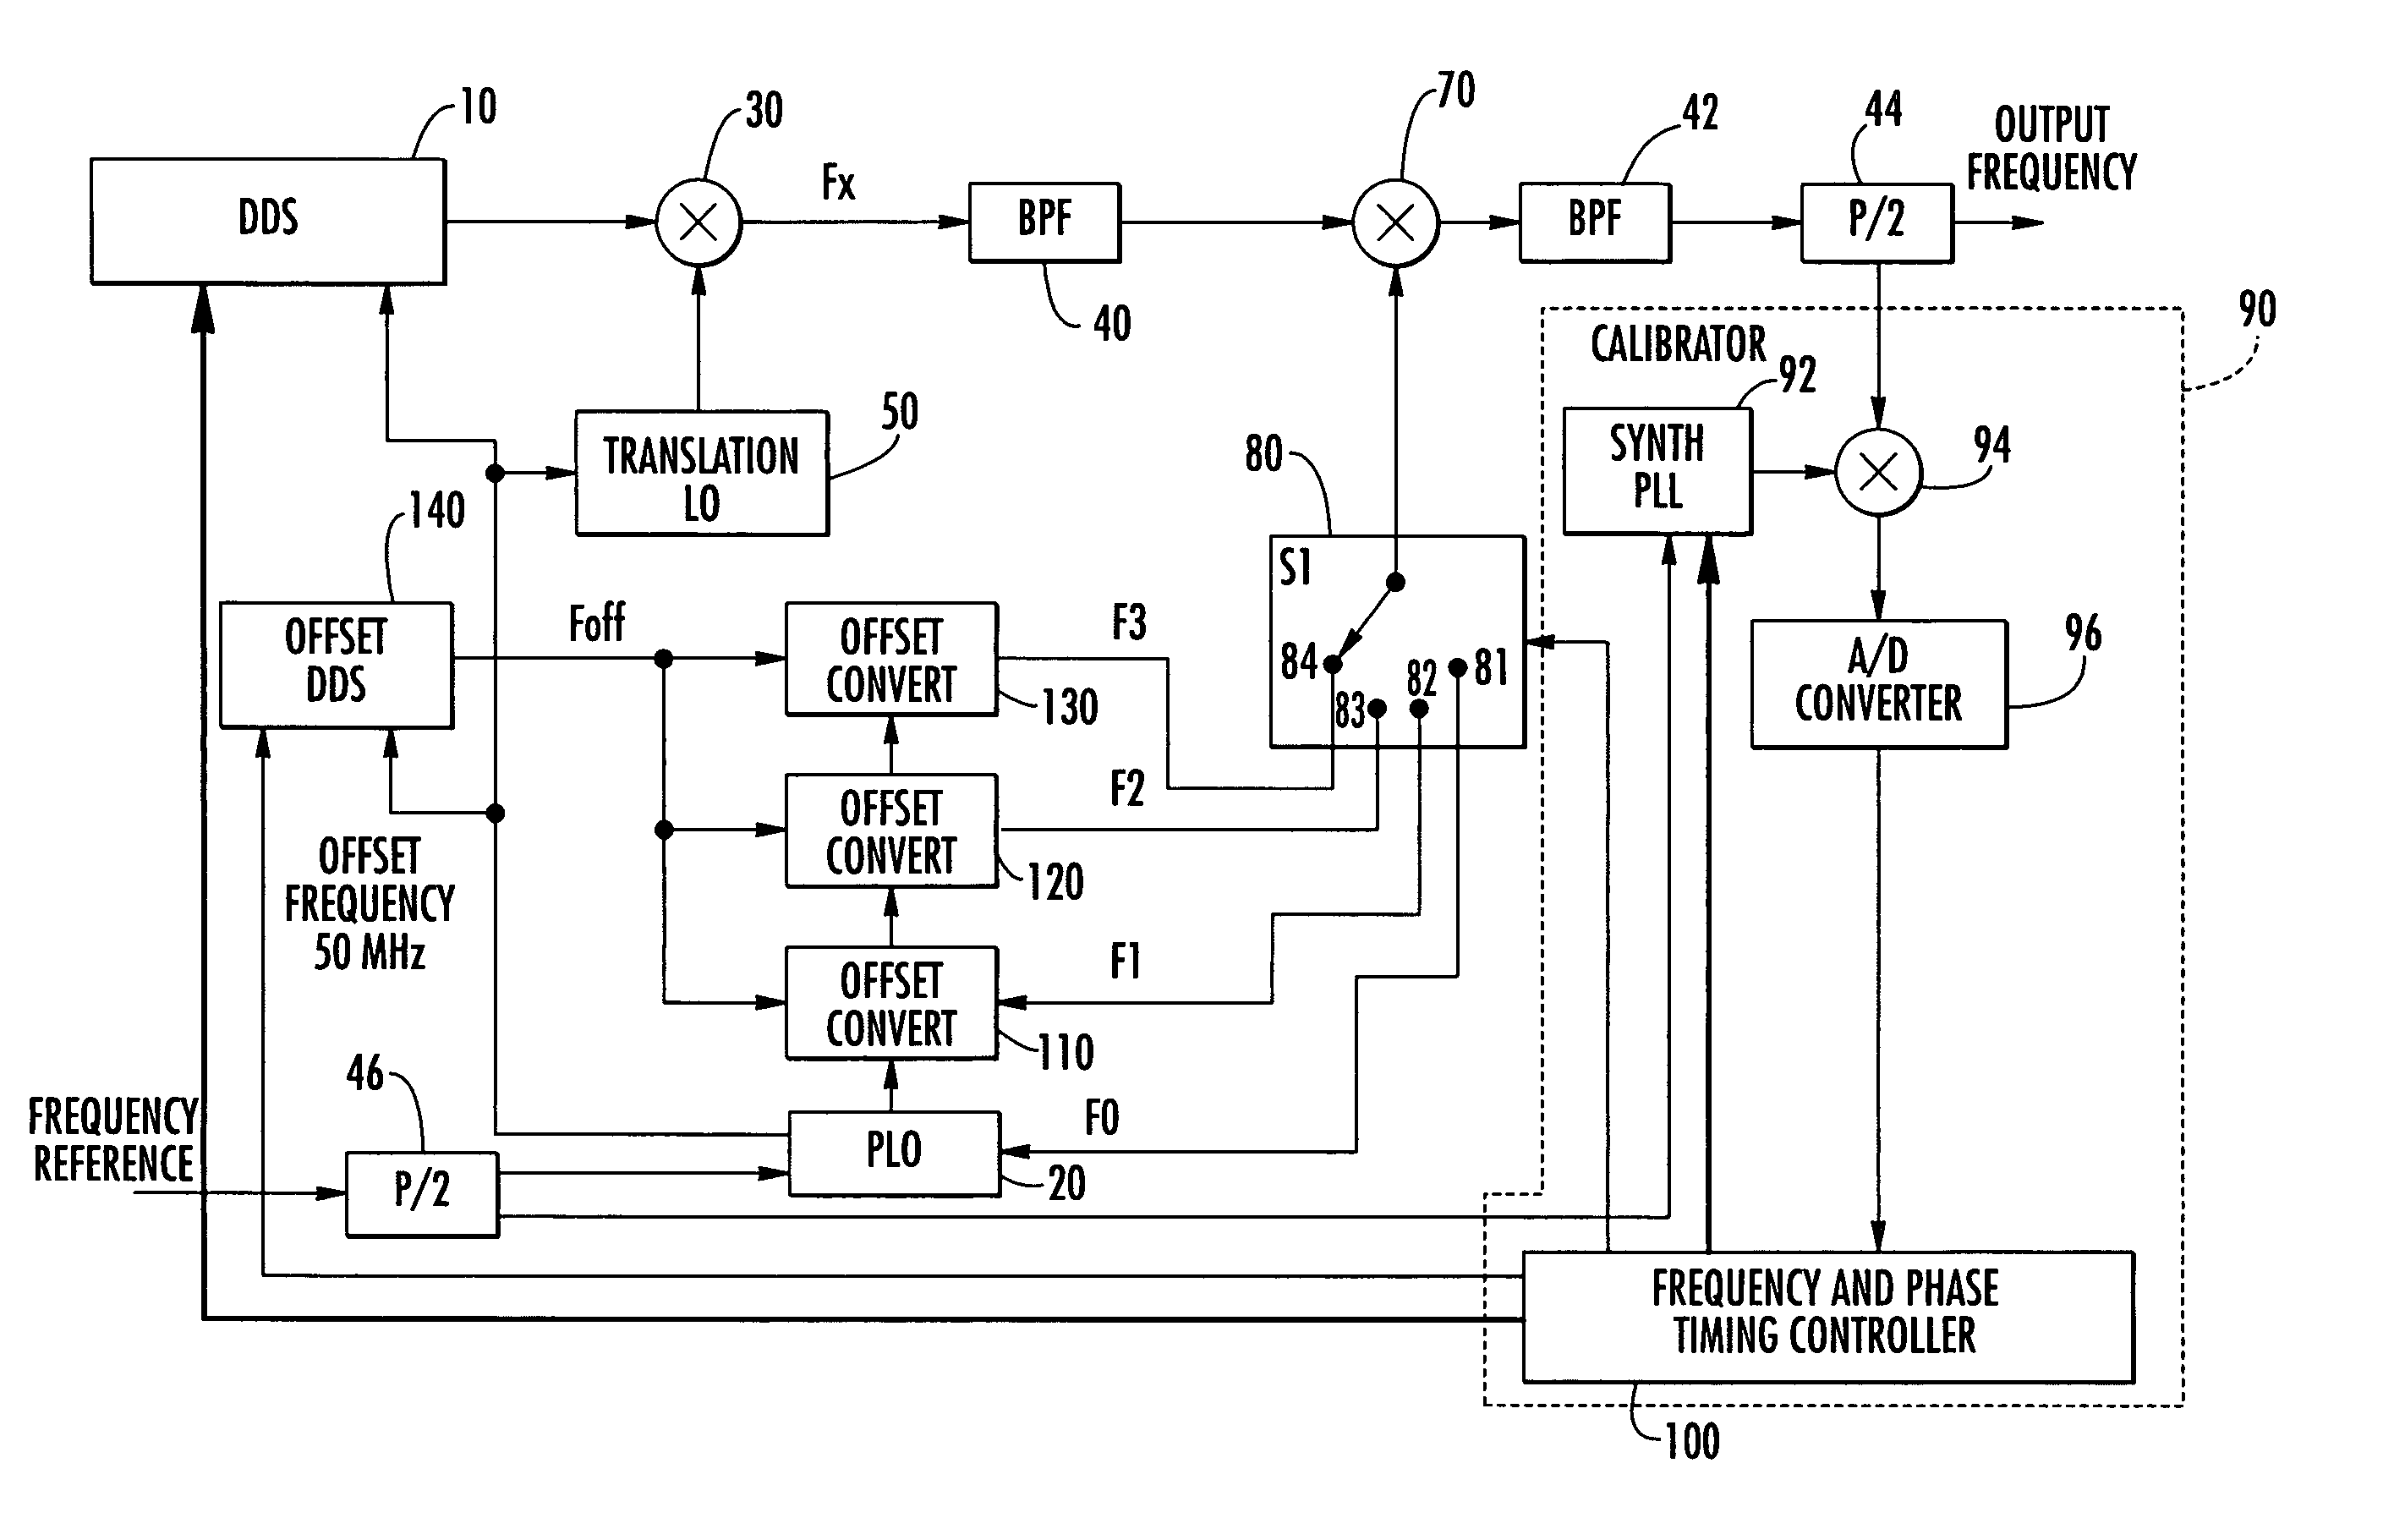 Self-calibrating wideband phase continuous synthesizer and associated methods